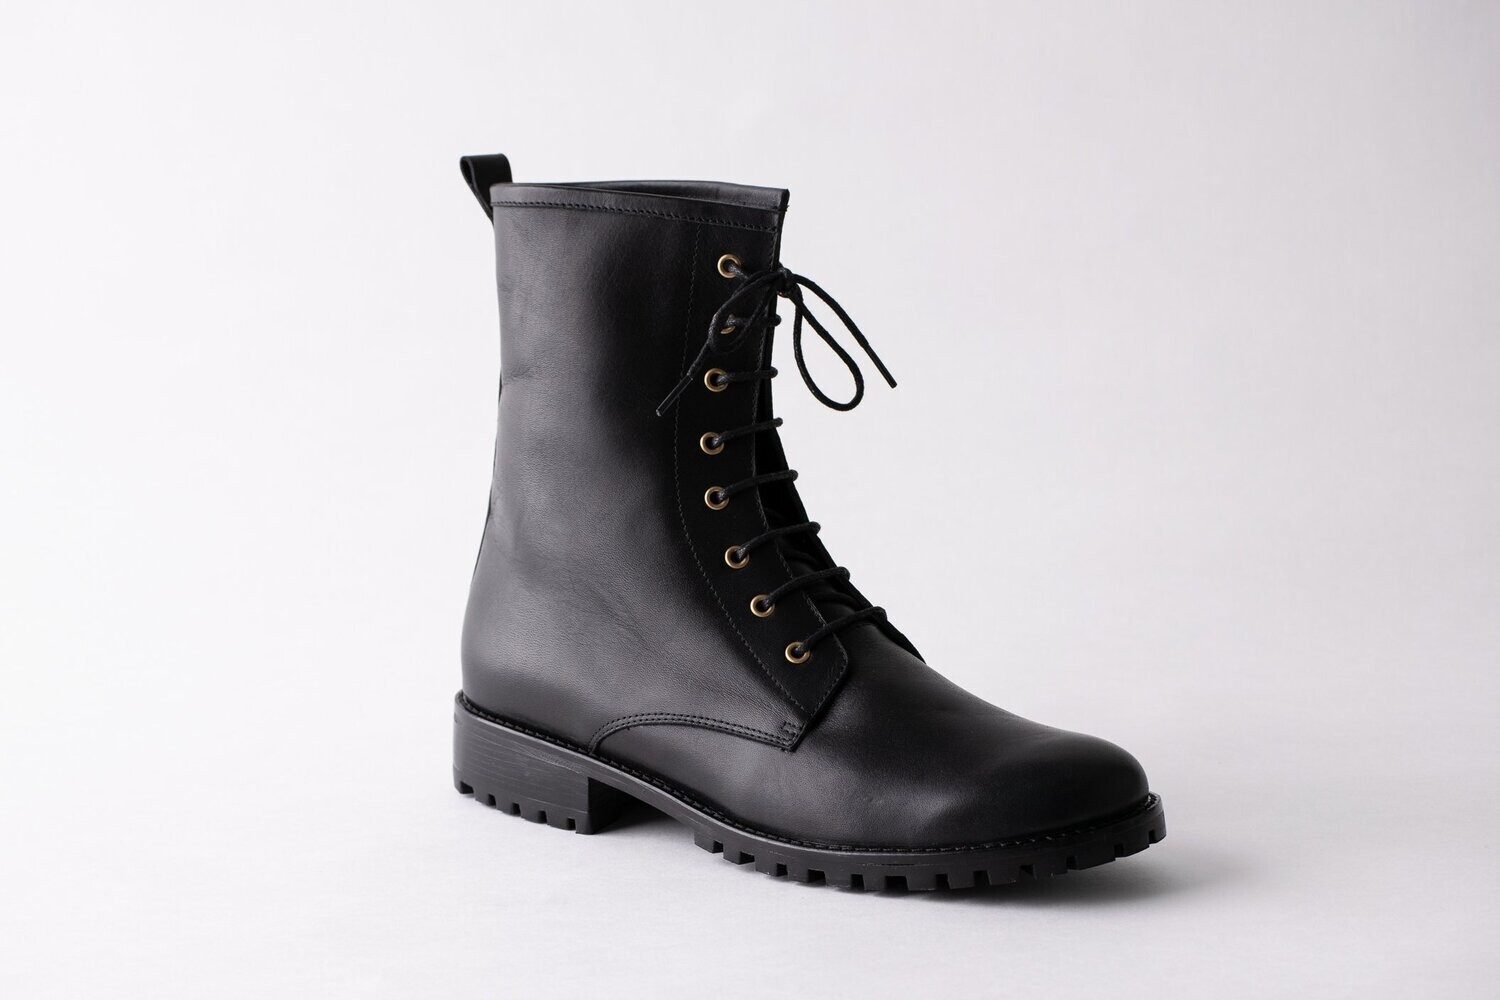 LILY PAIGE COMBAT BOOT